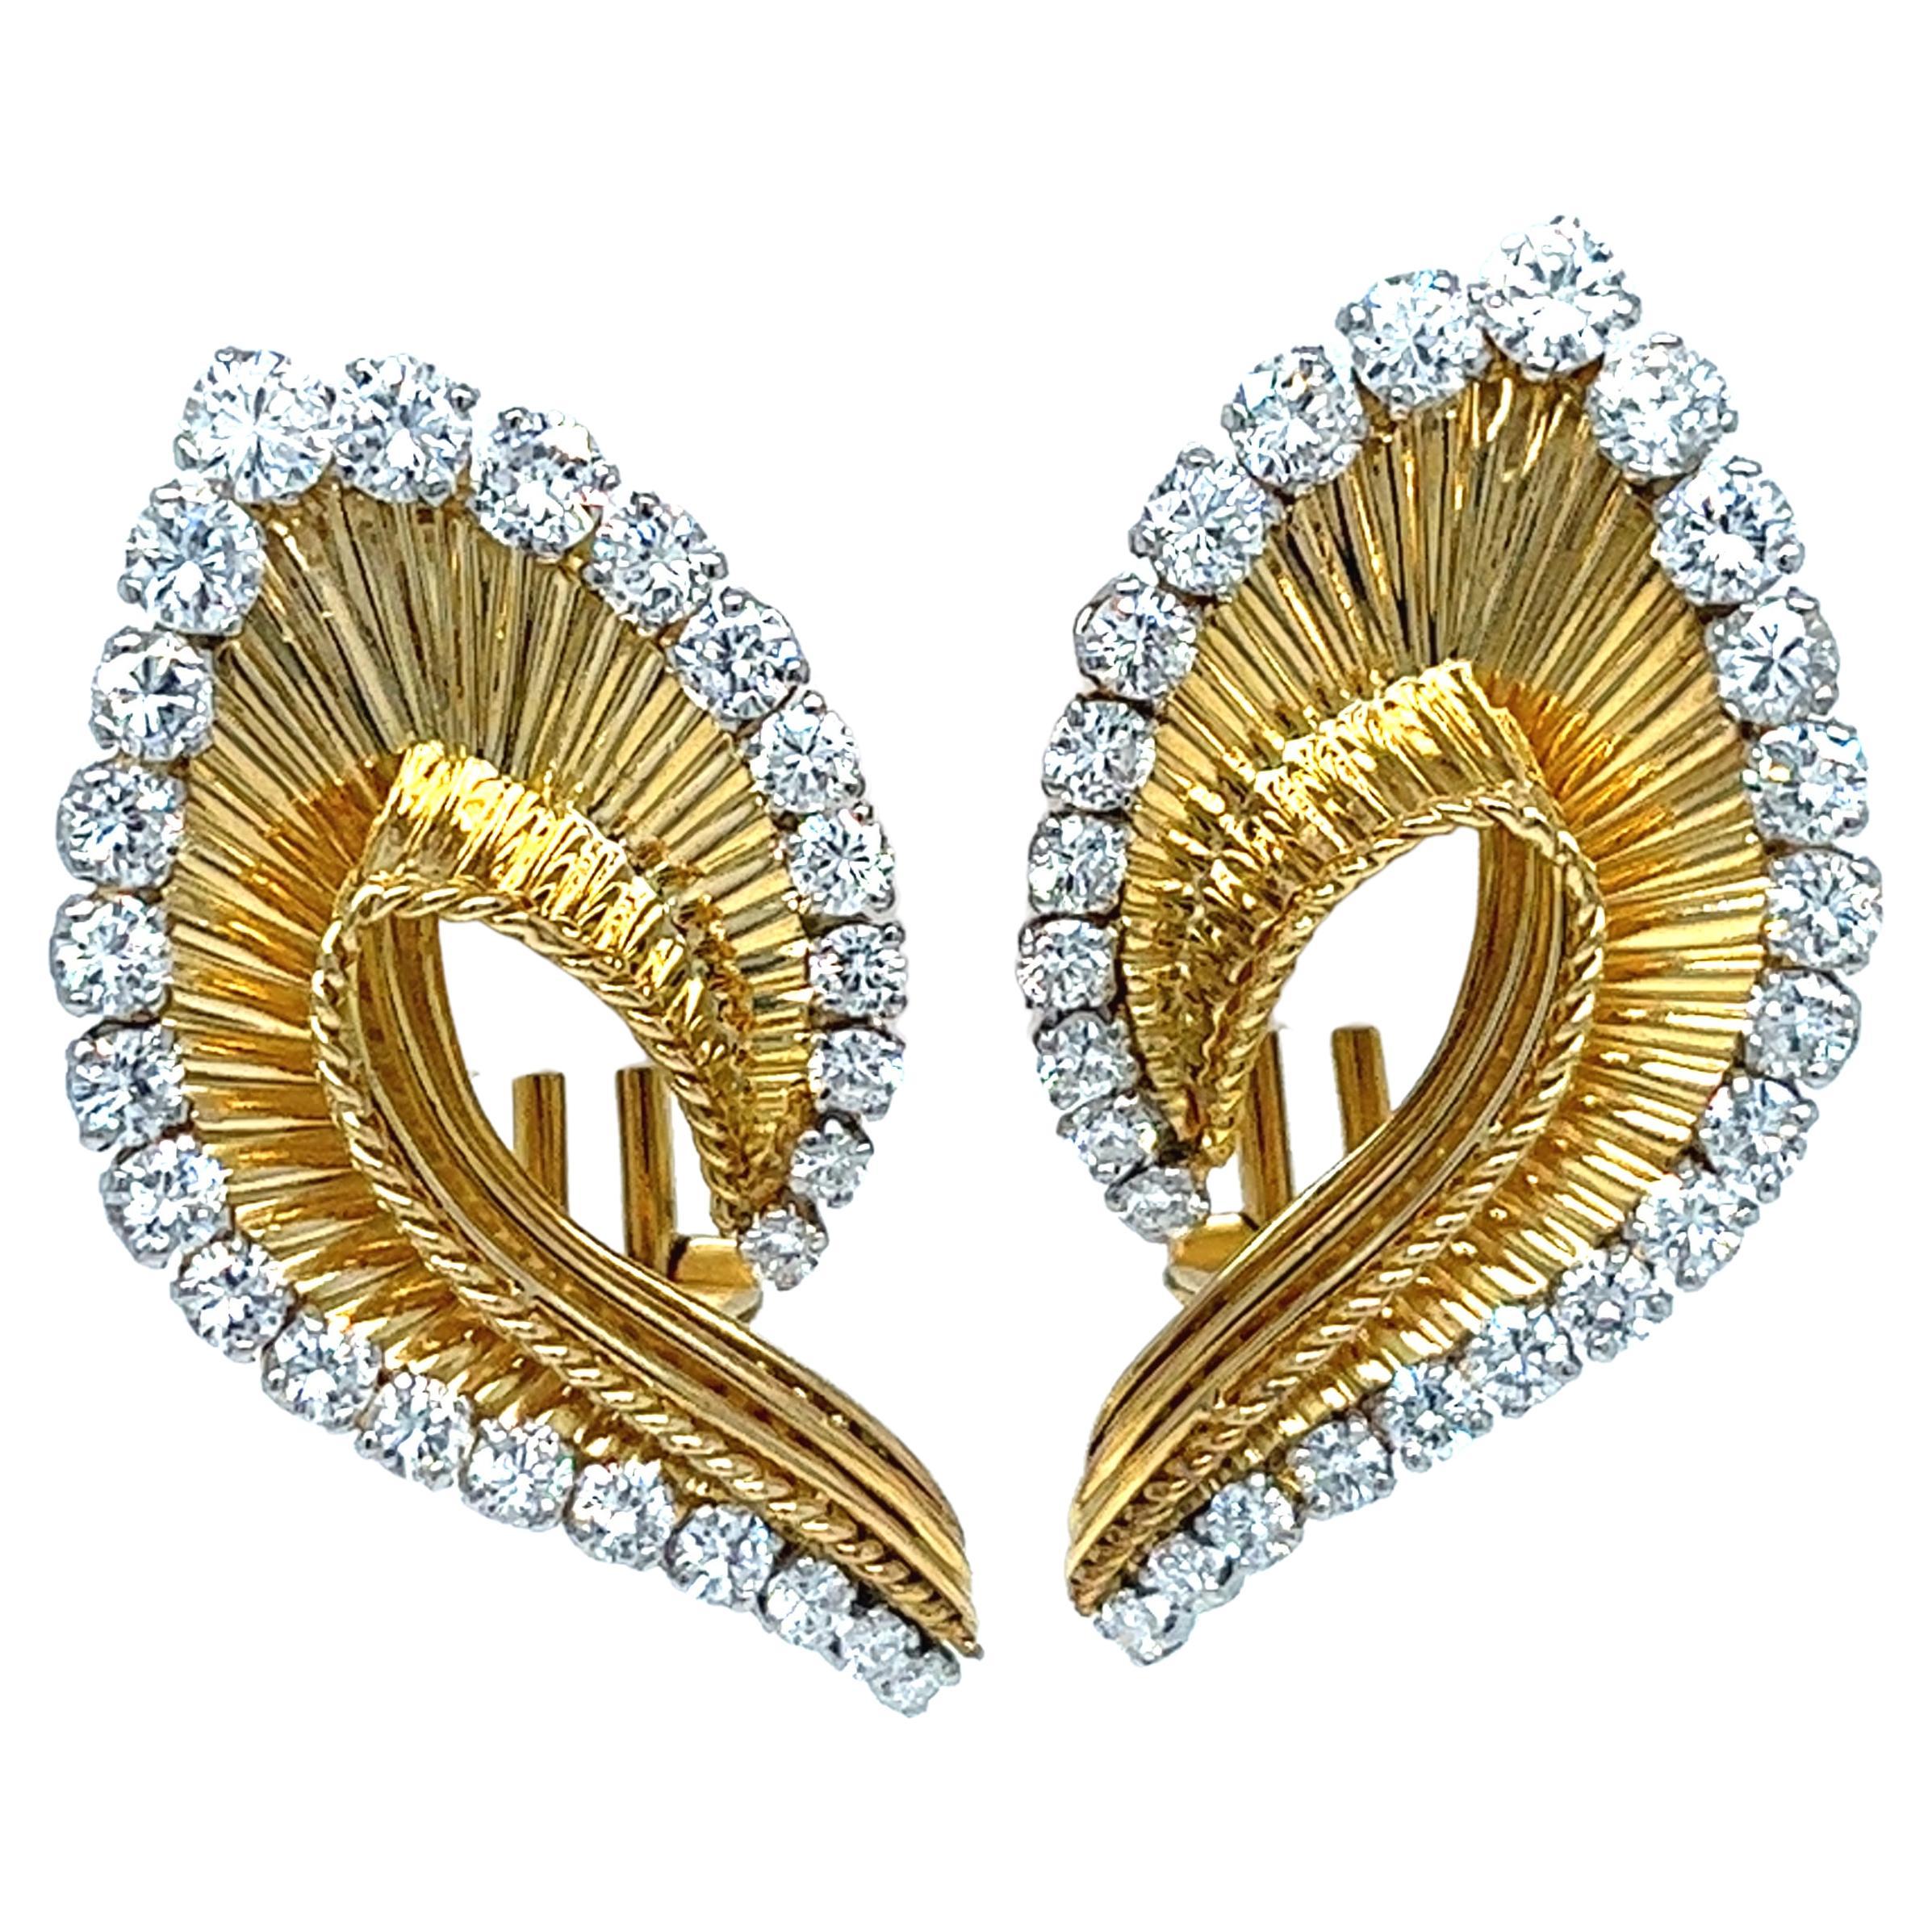 Leaf Design Earrings 18kt Yellow Gold Wire with 26 Diamonds Full Cut 3.08 Cts.